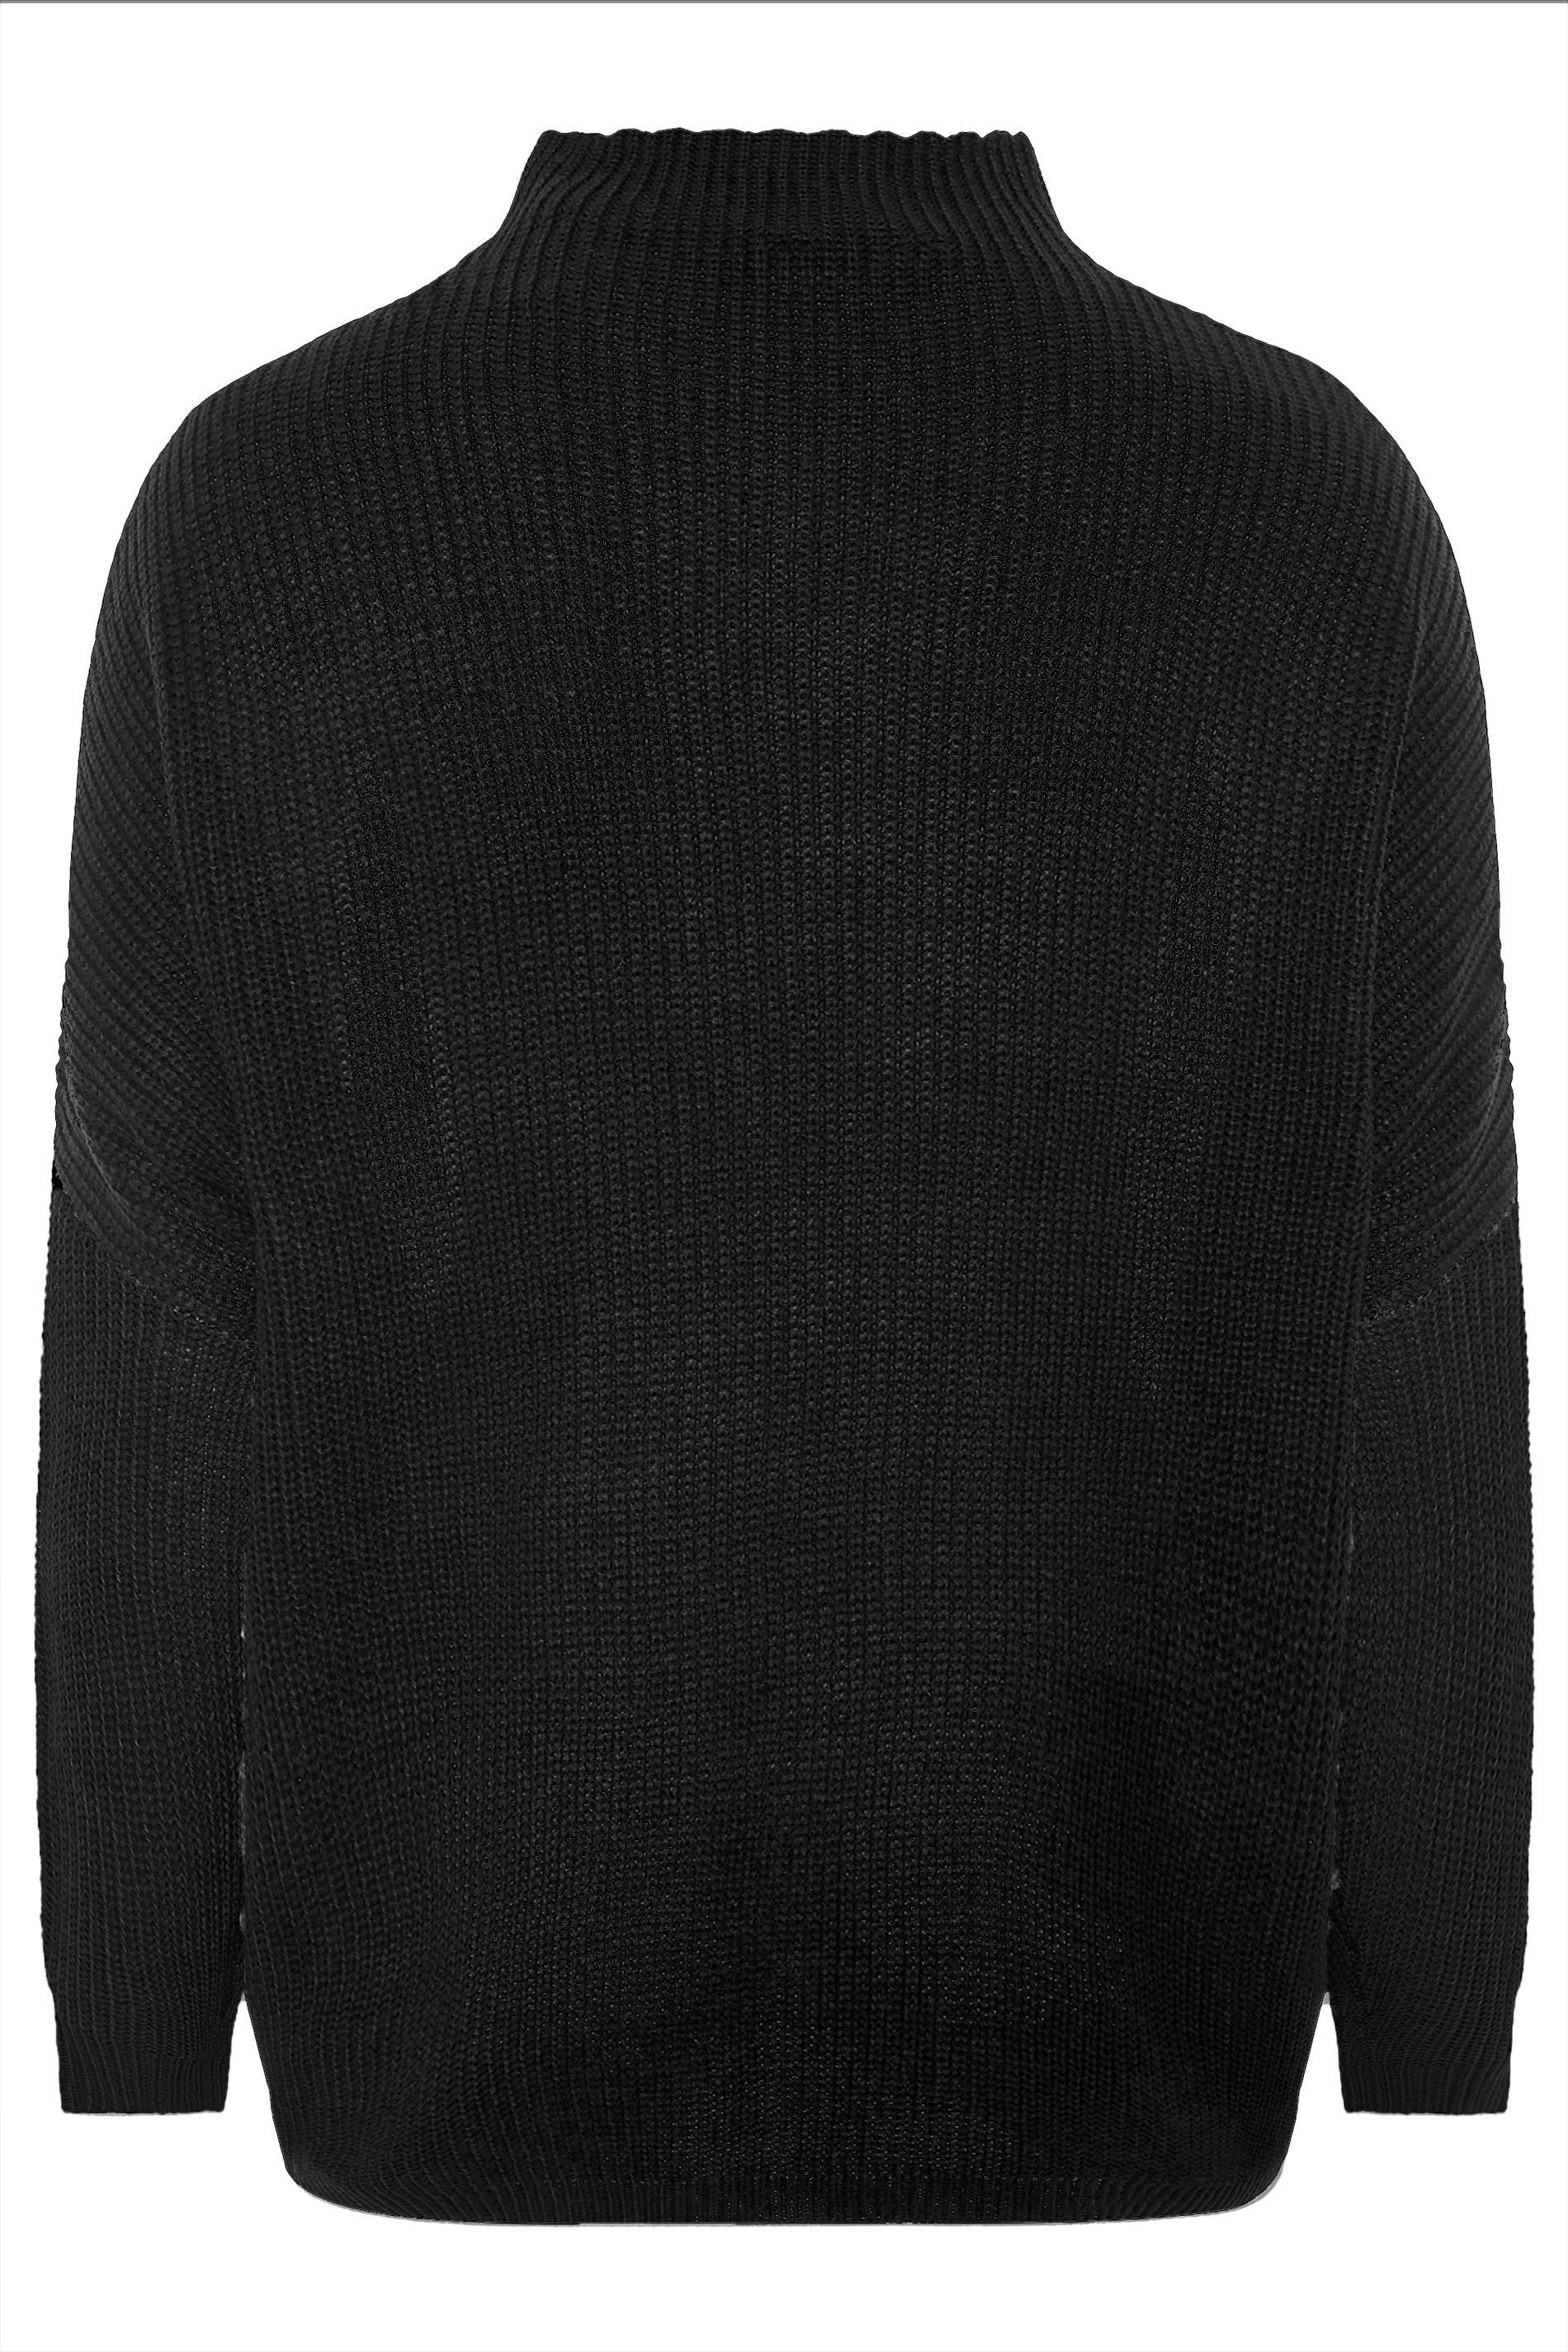 Plus Size Curve Black Oversized Knitted Jumper | Yours Clothing